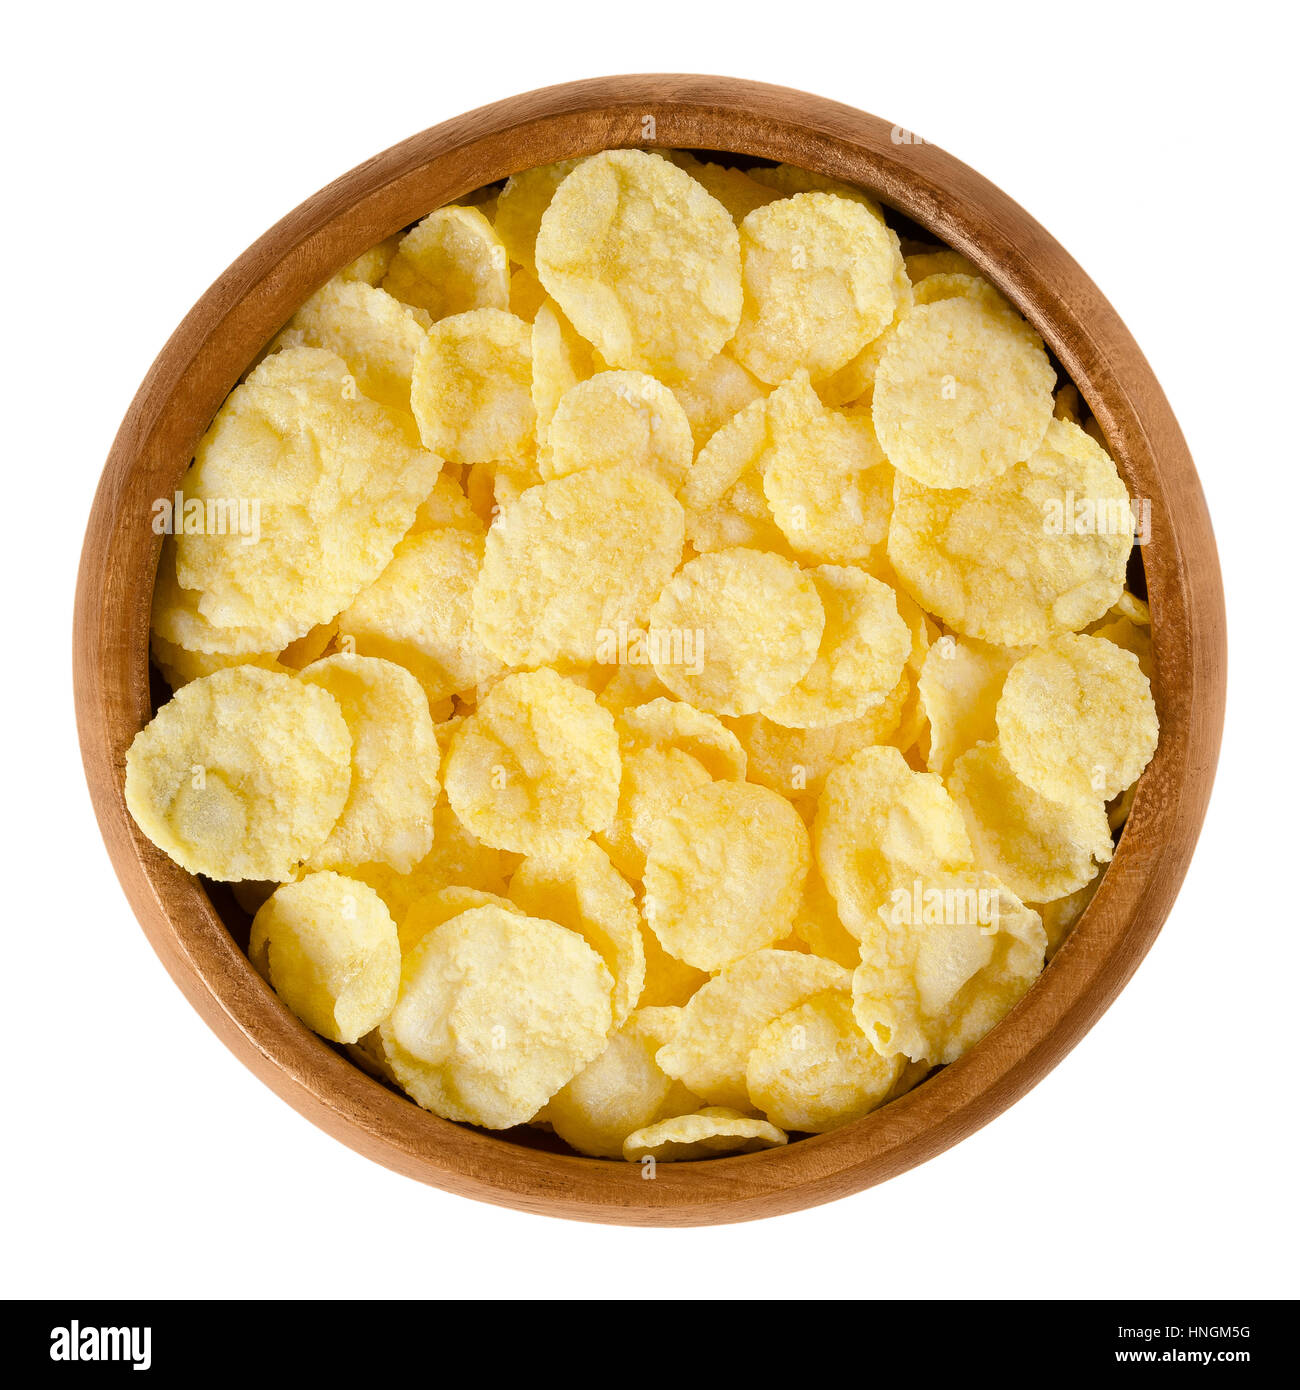 Corn flakes in wooden bowl. Crispy cornflakes, a popular breakfast cereal made by toasting small flakes of corn. Stock Photo